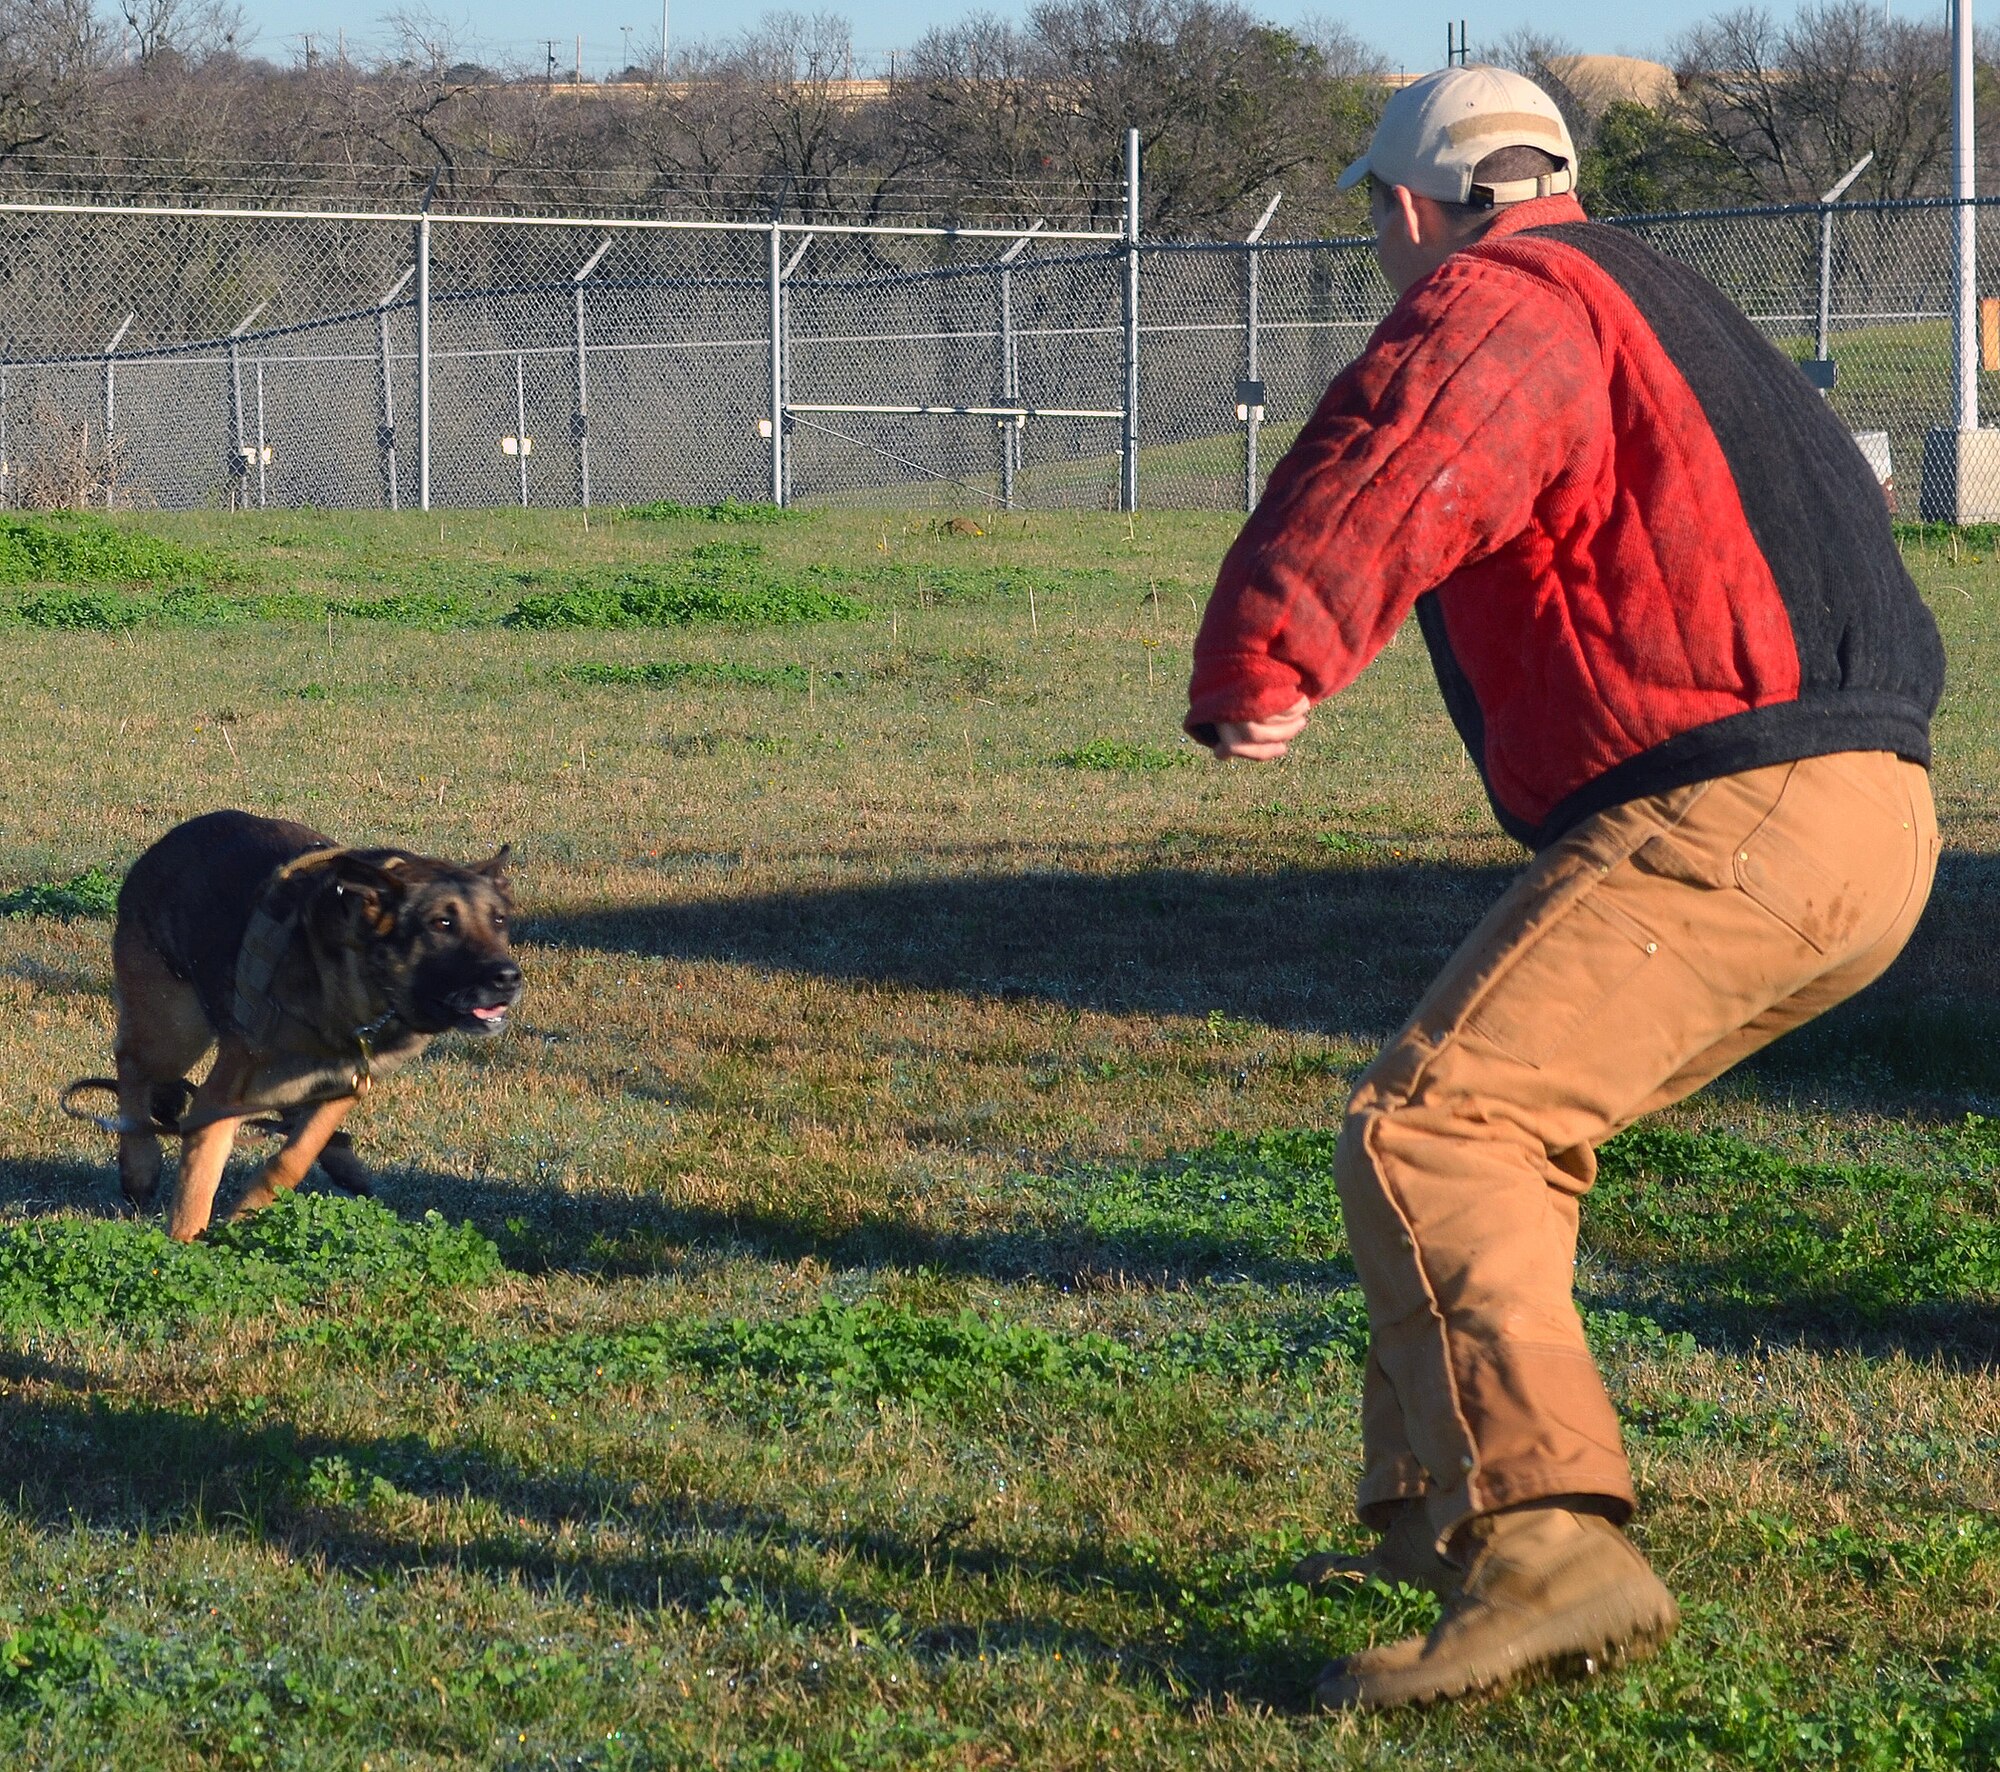 Military working dog Tarzan charges at Staff Sgt. Matthew Erfman, 802nd Security Forces Squadron military working dog handler, during a demonstration at Joint Base San Antonio-Lackland Annex Jan. 23. The demonstration was held before a group of area school superintendents and administrators who toured JBSA-Lackland at the invitation of JBSA leaders.